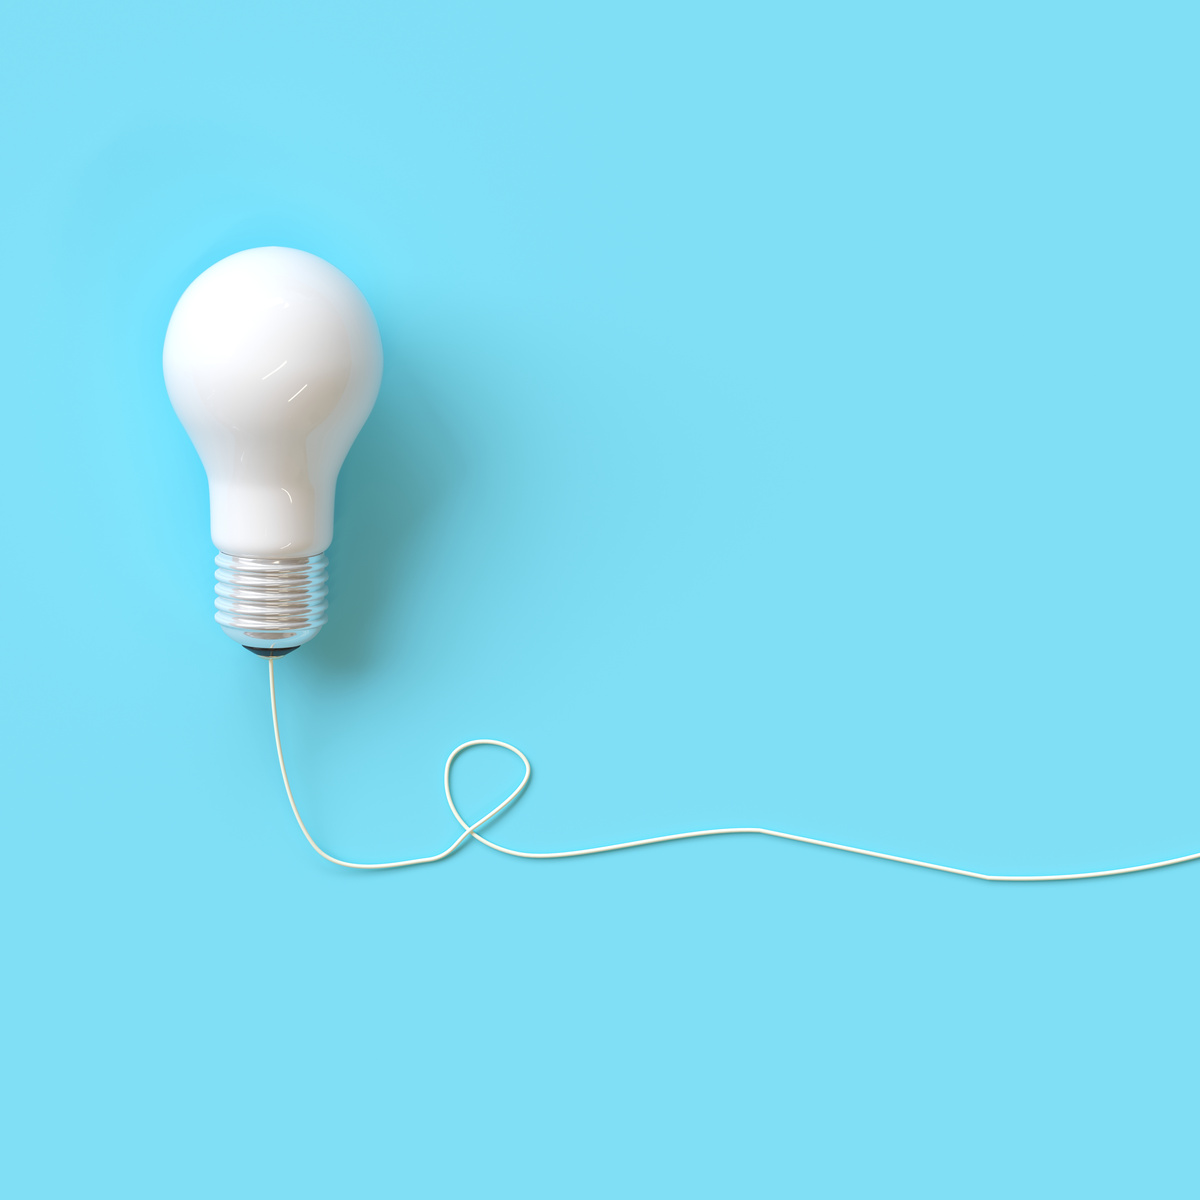 White light bulb with wire on blue background for copy space. minimal idea concept. top view